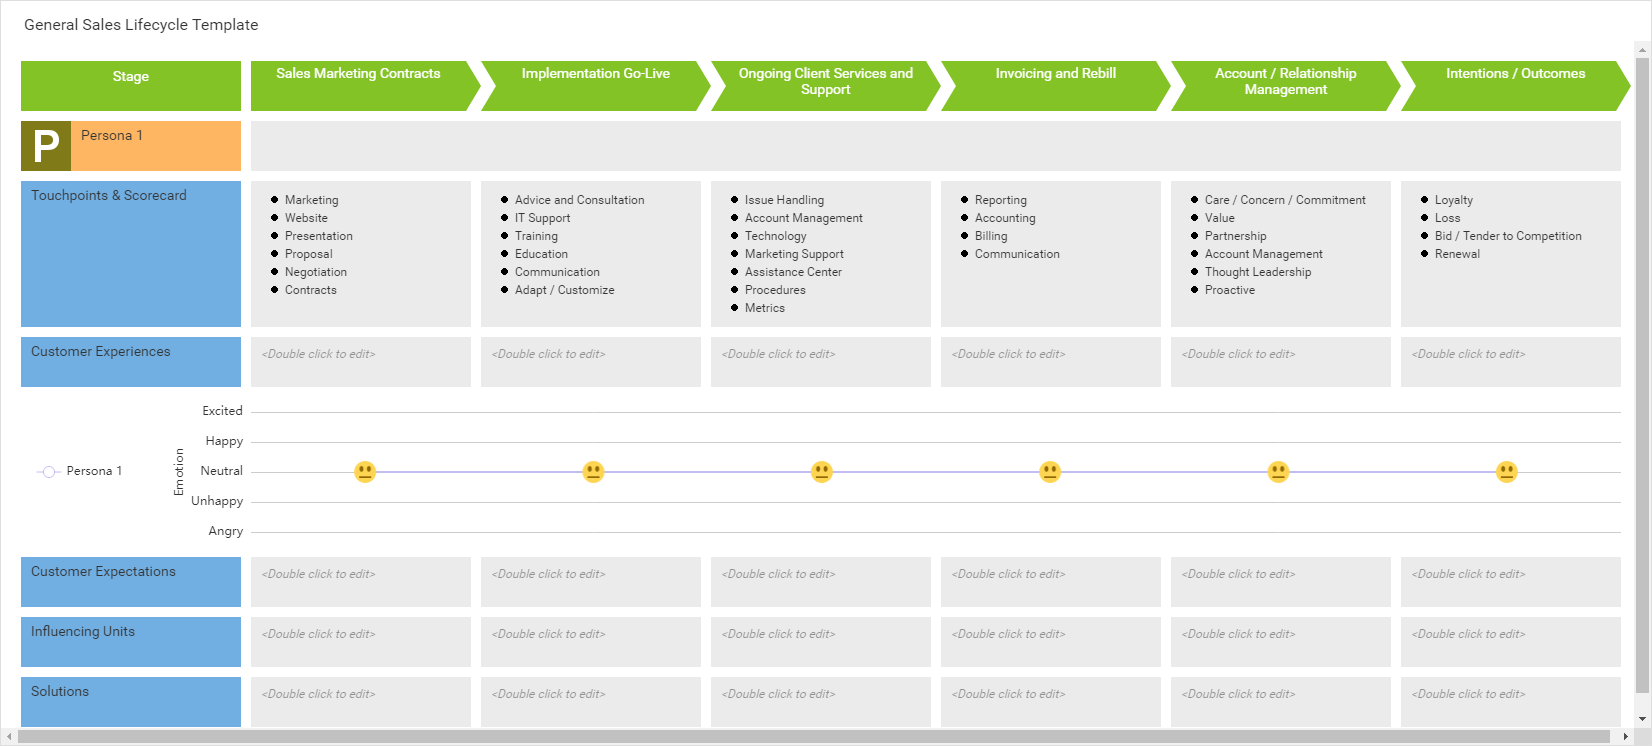 Customer Journey Mapping template: General Sales Lifecycle Template (Created by Visual Paradigm Online's Customer Journey Mapping maker)